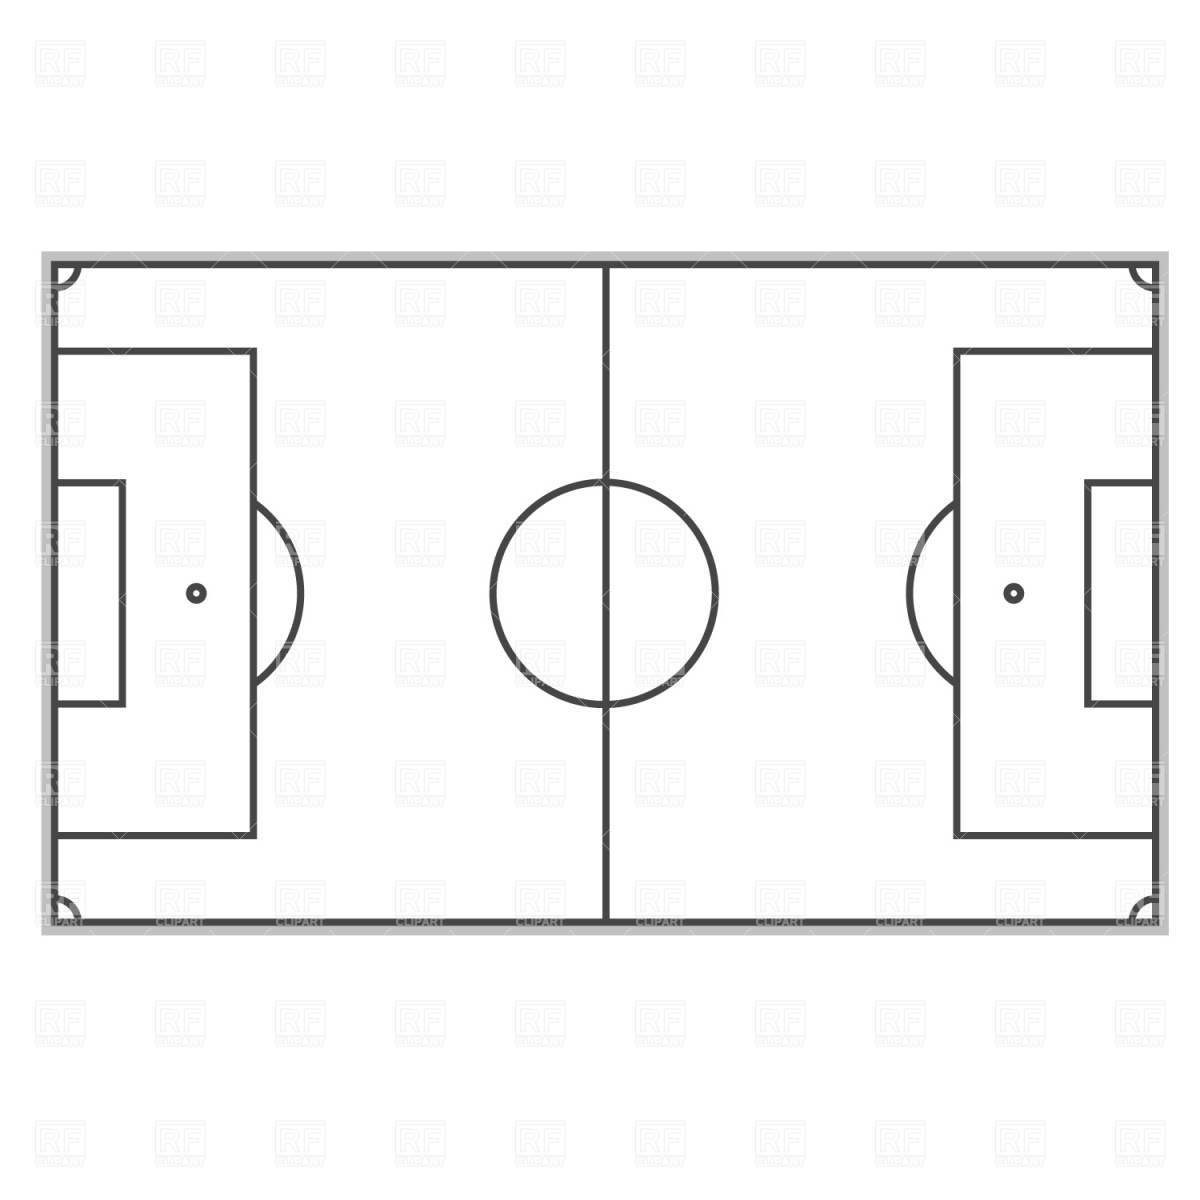 Soccer Field Plan Download Royalty Free Vector Clipart  Eps